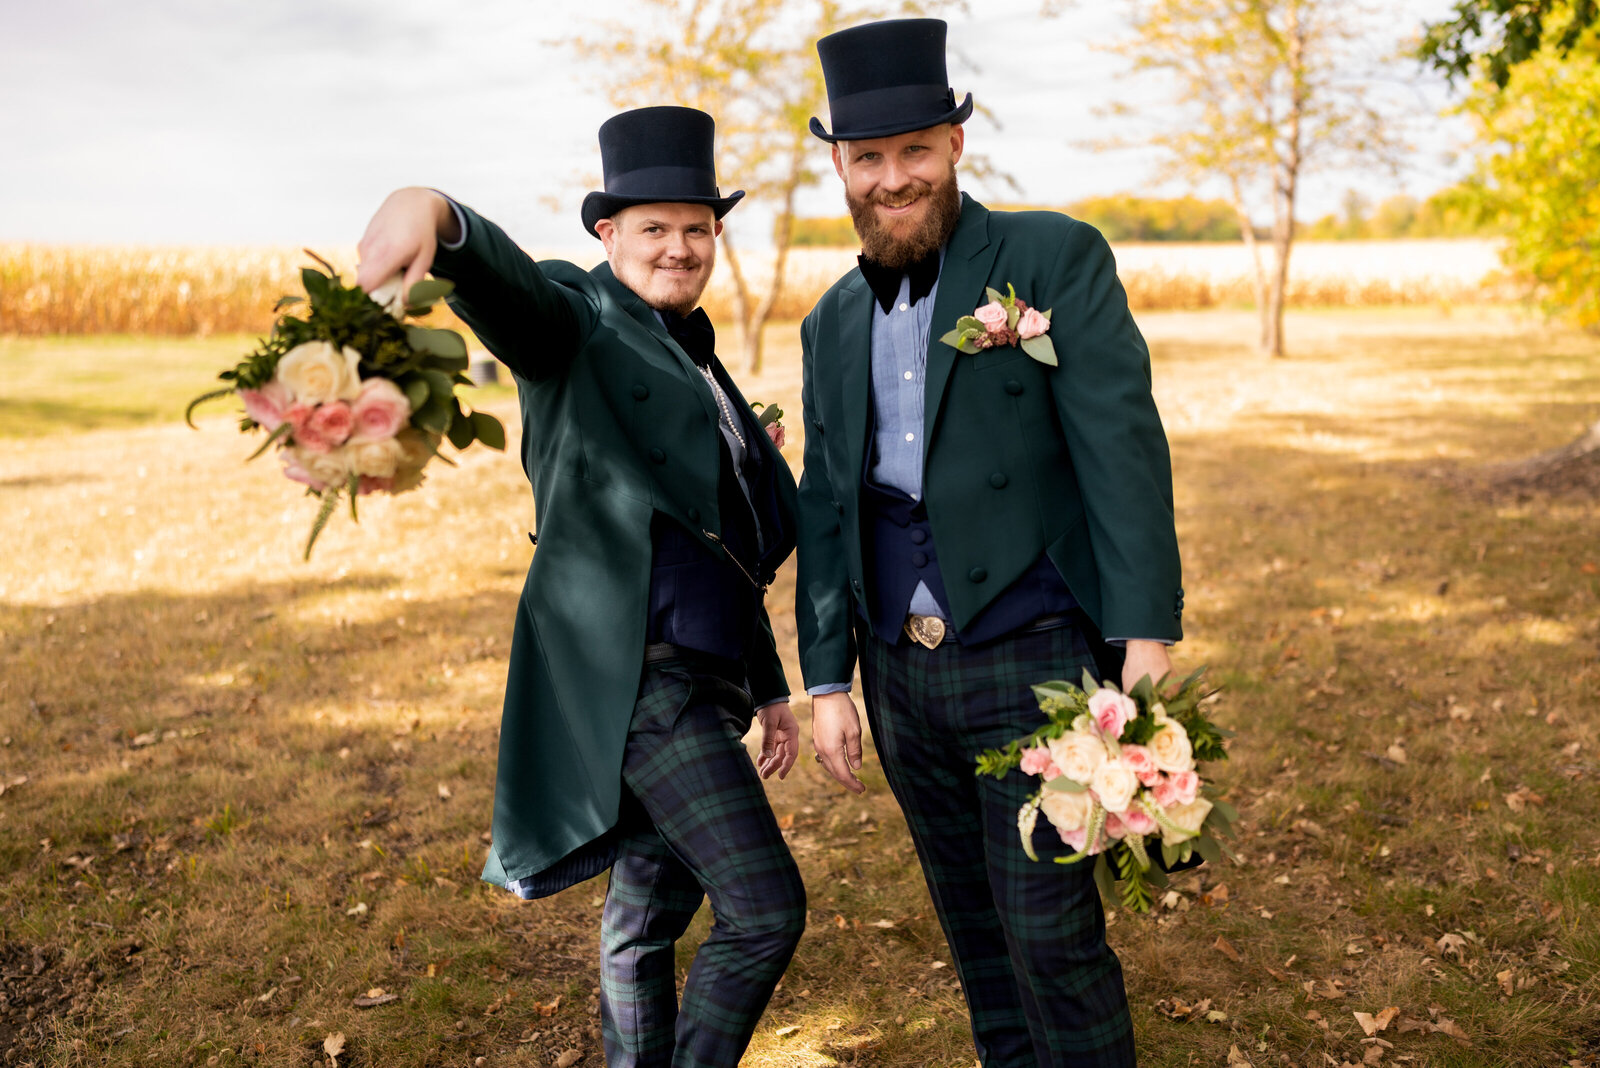 Tylor and Robert - Minnesota Gay Wedding Photography - Belle Plaine - RKH Images - Portraits (247 of 294)